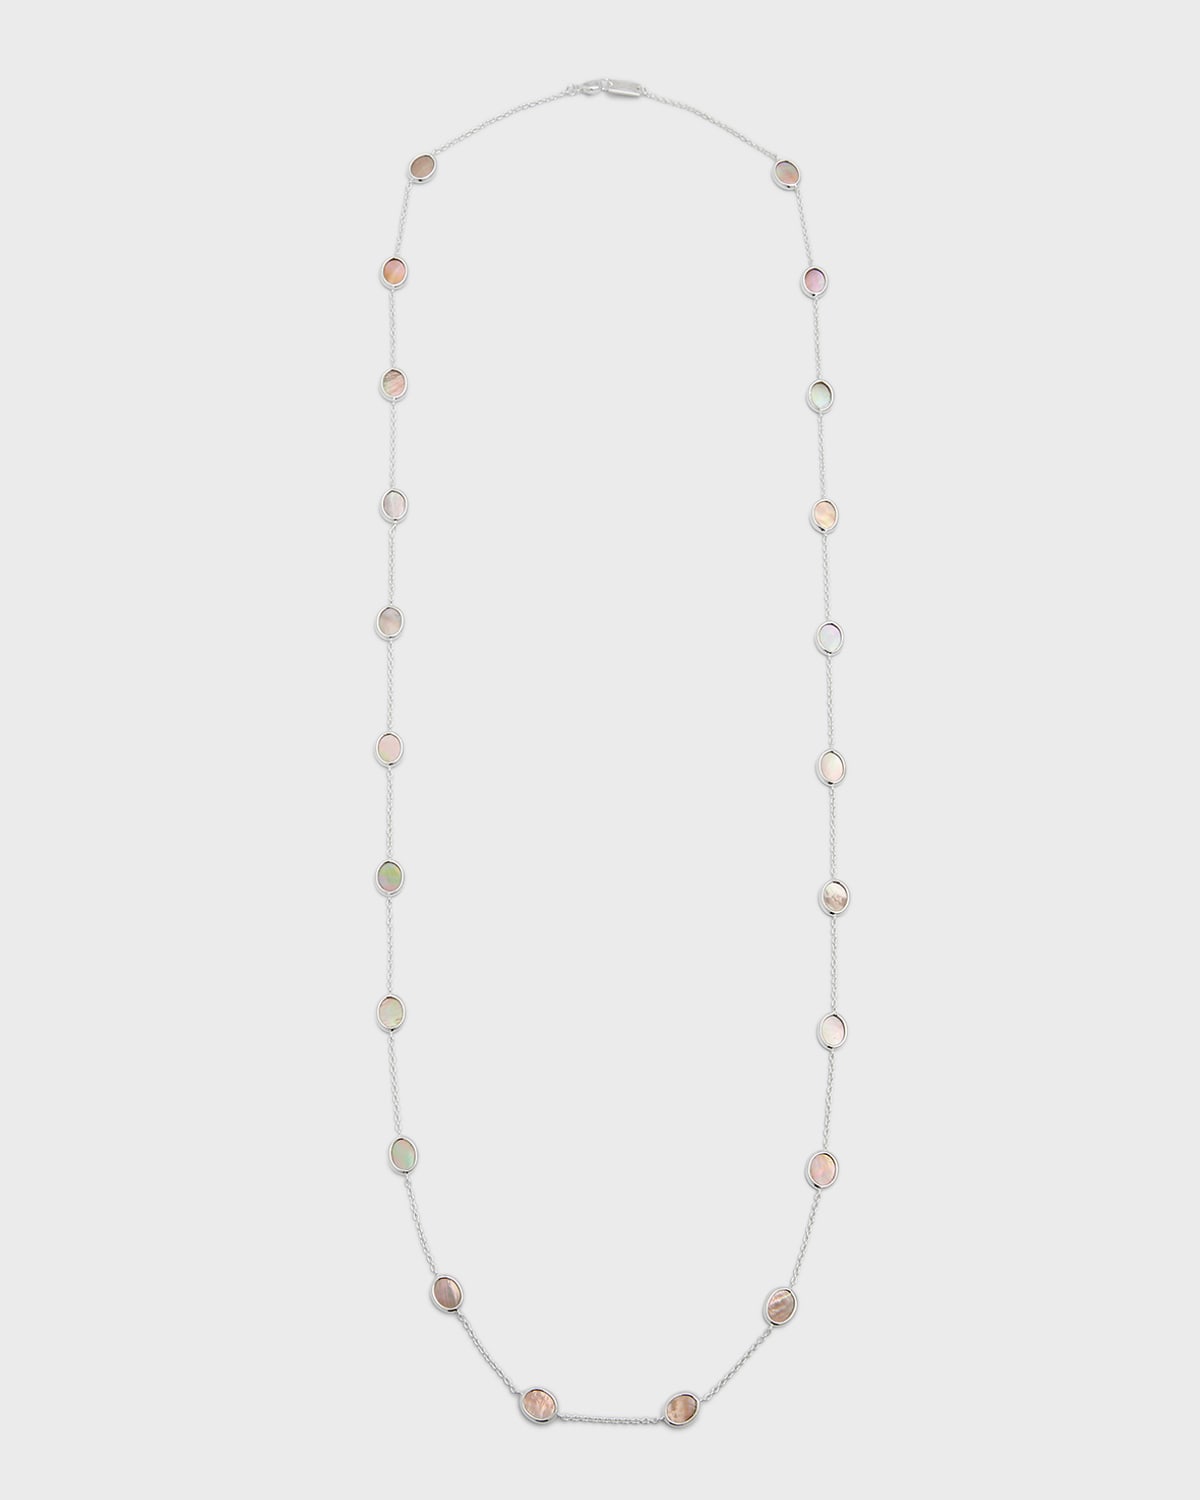 IPPOLITA STERLING SILVER POLISHED ROCK CANDY LONG CONFETTI NECKLACE